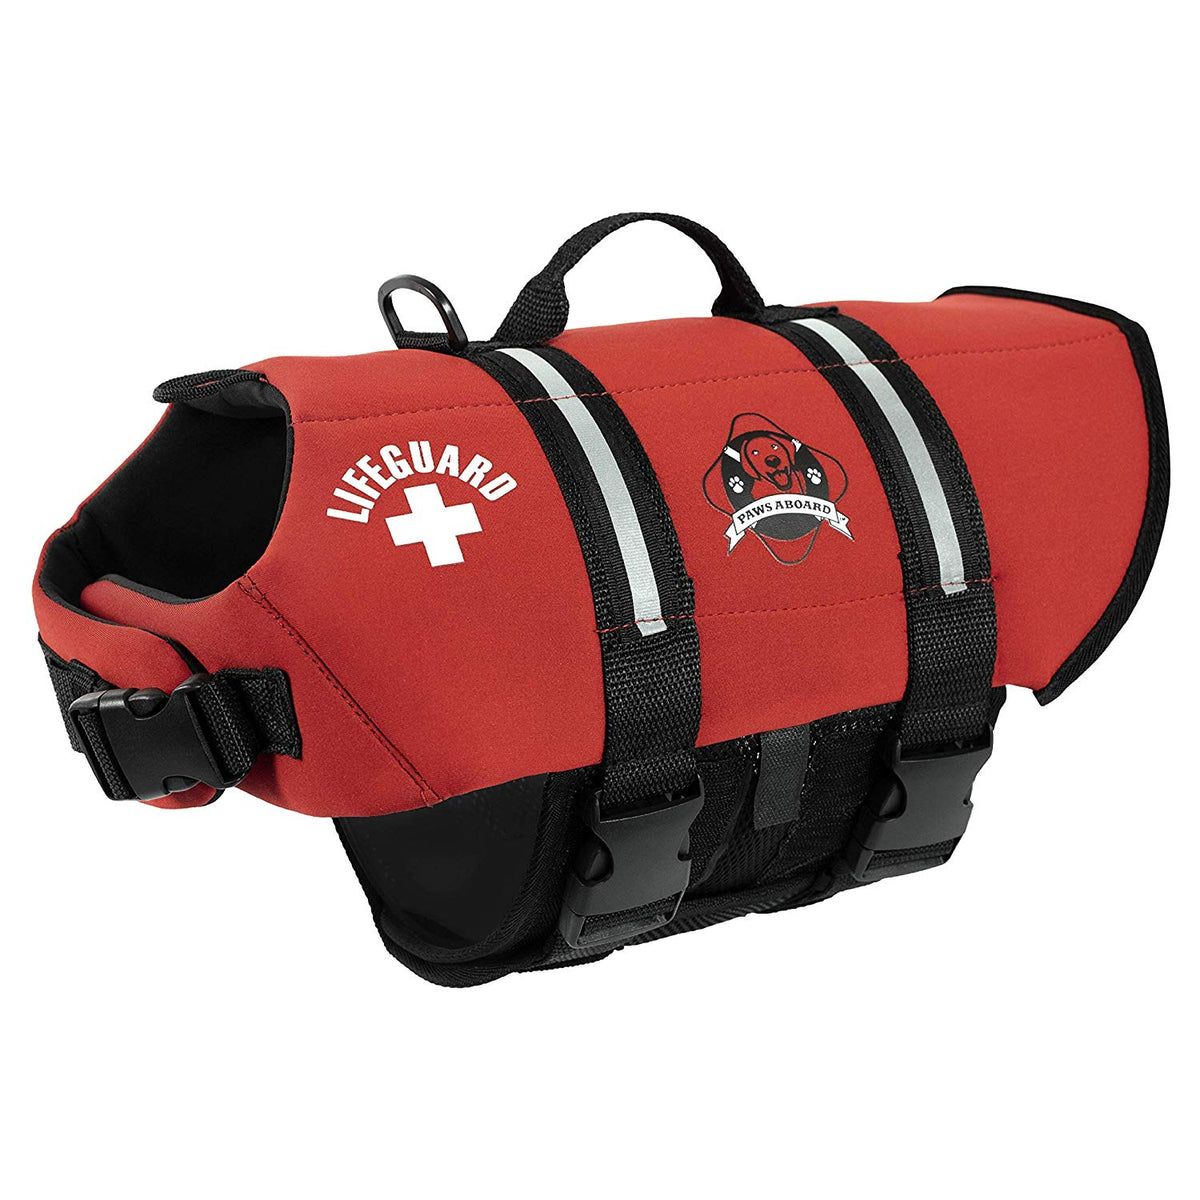 Paws Aboard Red Neoprene Pet Life Vest - 3 Red Rovers